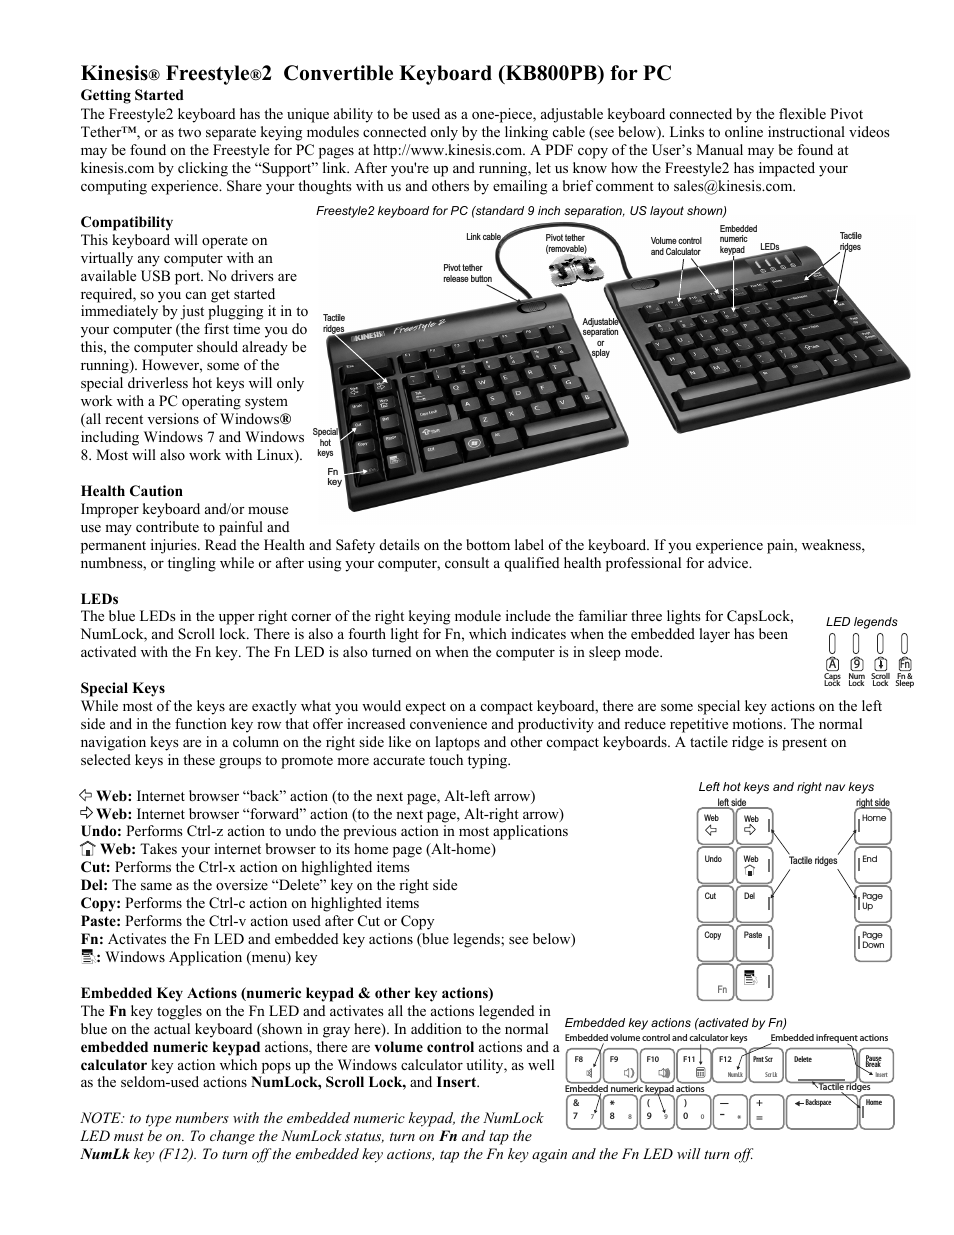 KB800PB Freestyle2 Keyboard for PC